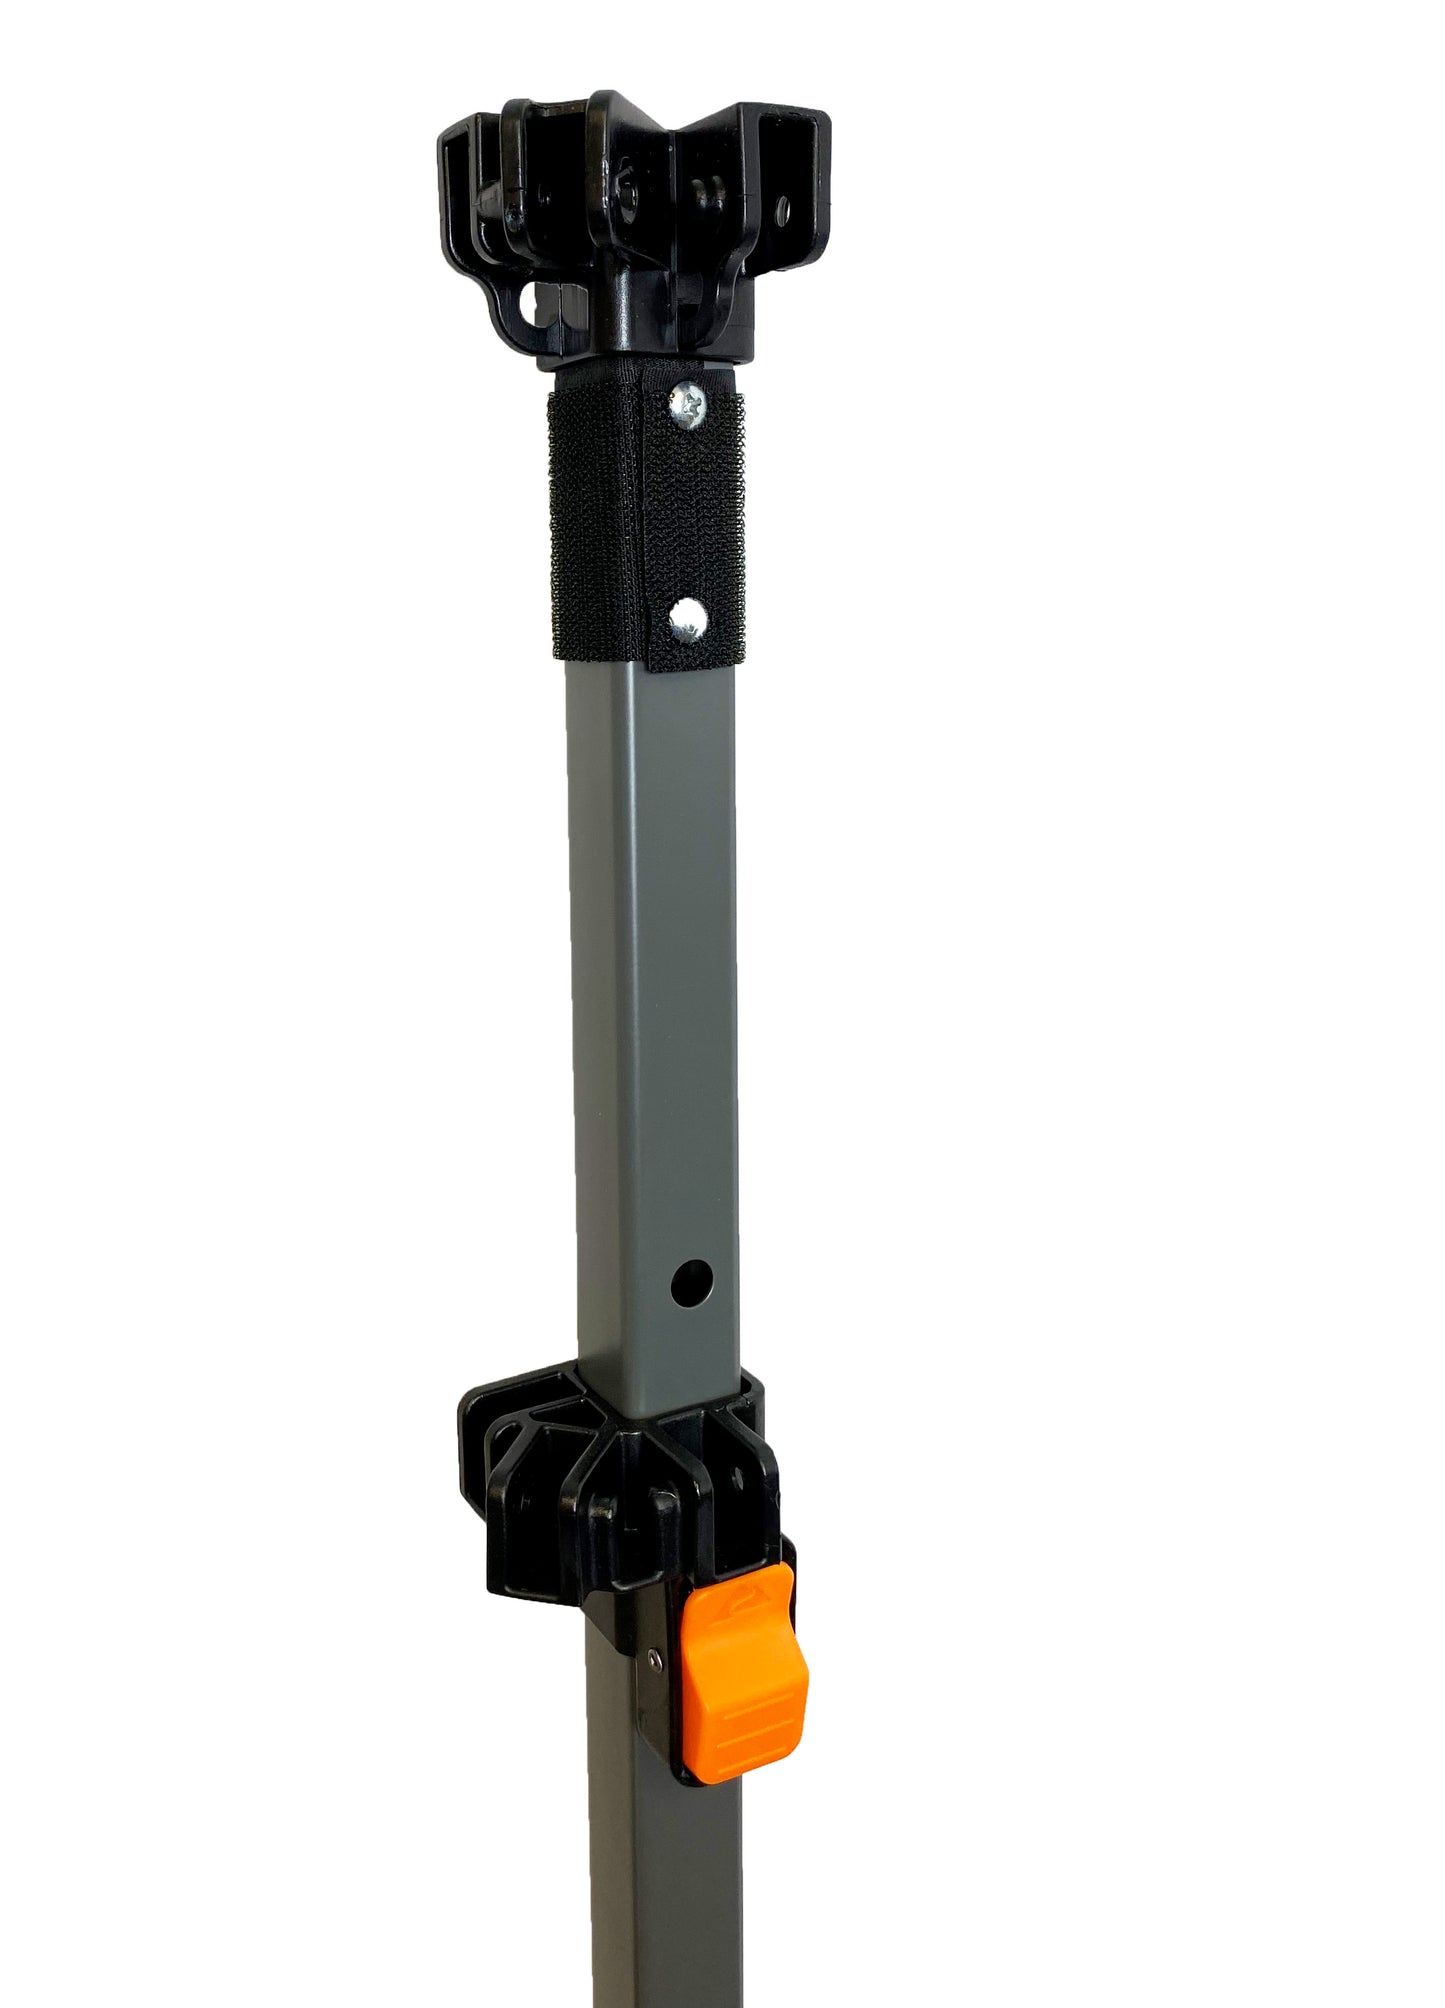  This image showcases a close-up of the upper section of an adjustable leg for an Ozark Trail 12' x 12' Canopy, featuring the canopy attachment point and the push-button adjuster mechanism for height modification.